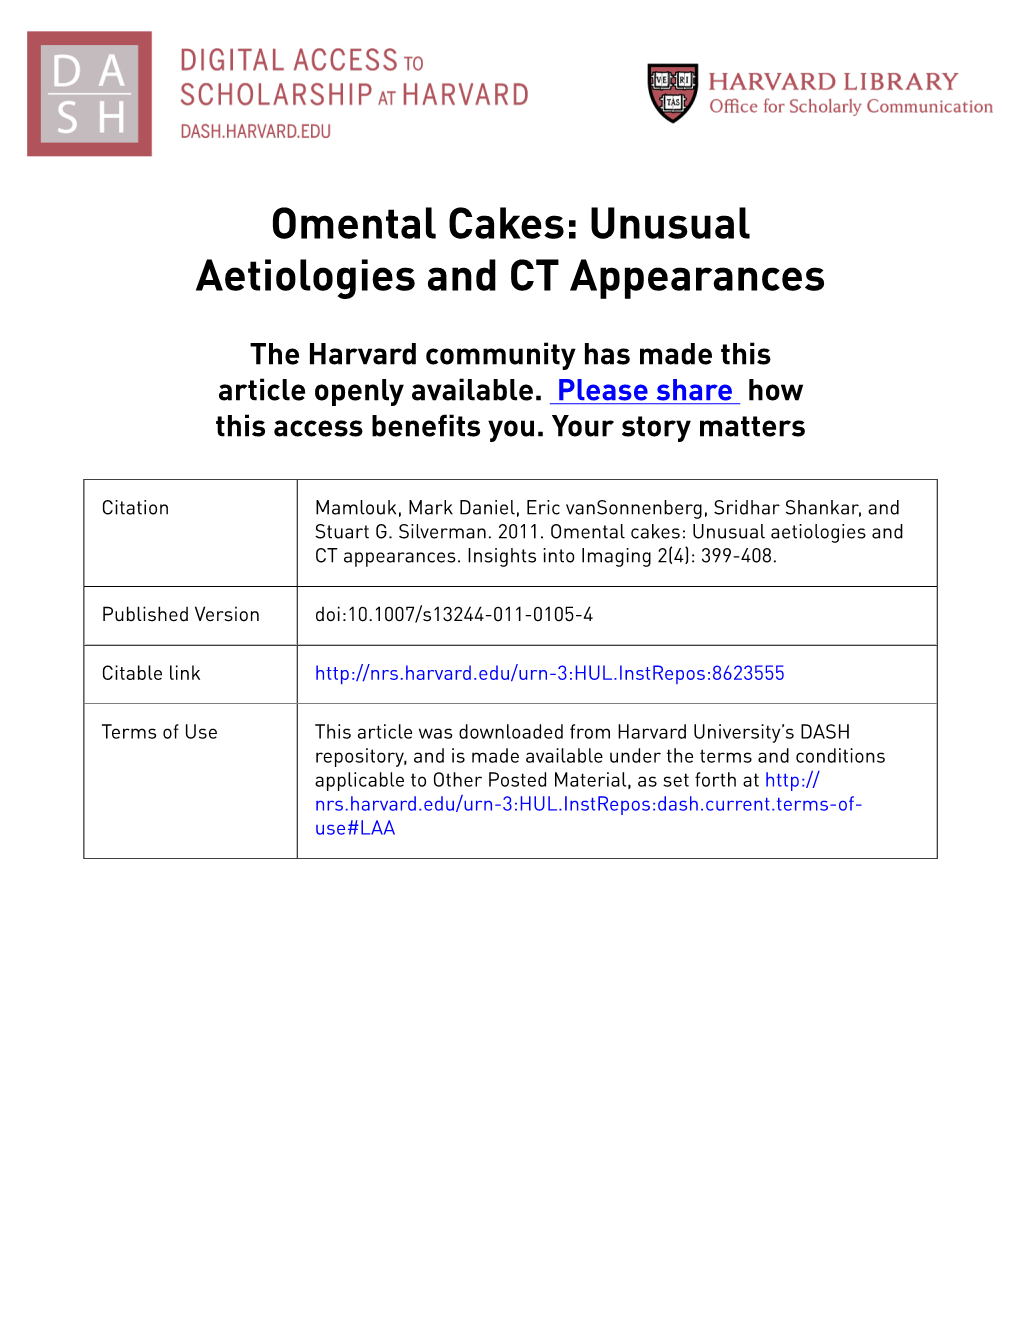 Omental Cakes: Unusual Aetiologies and CT Appearances